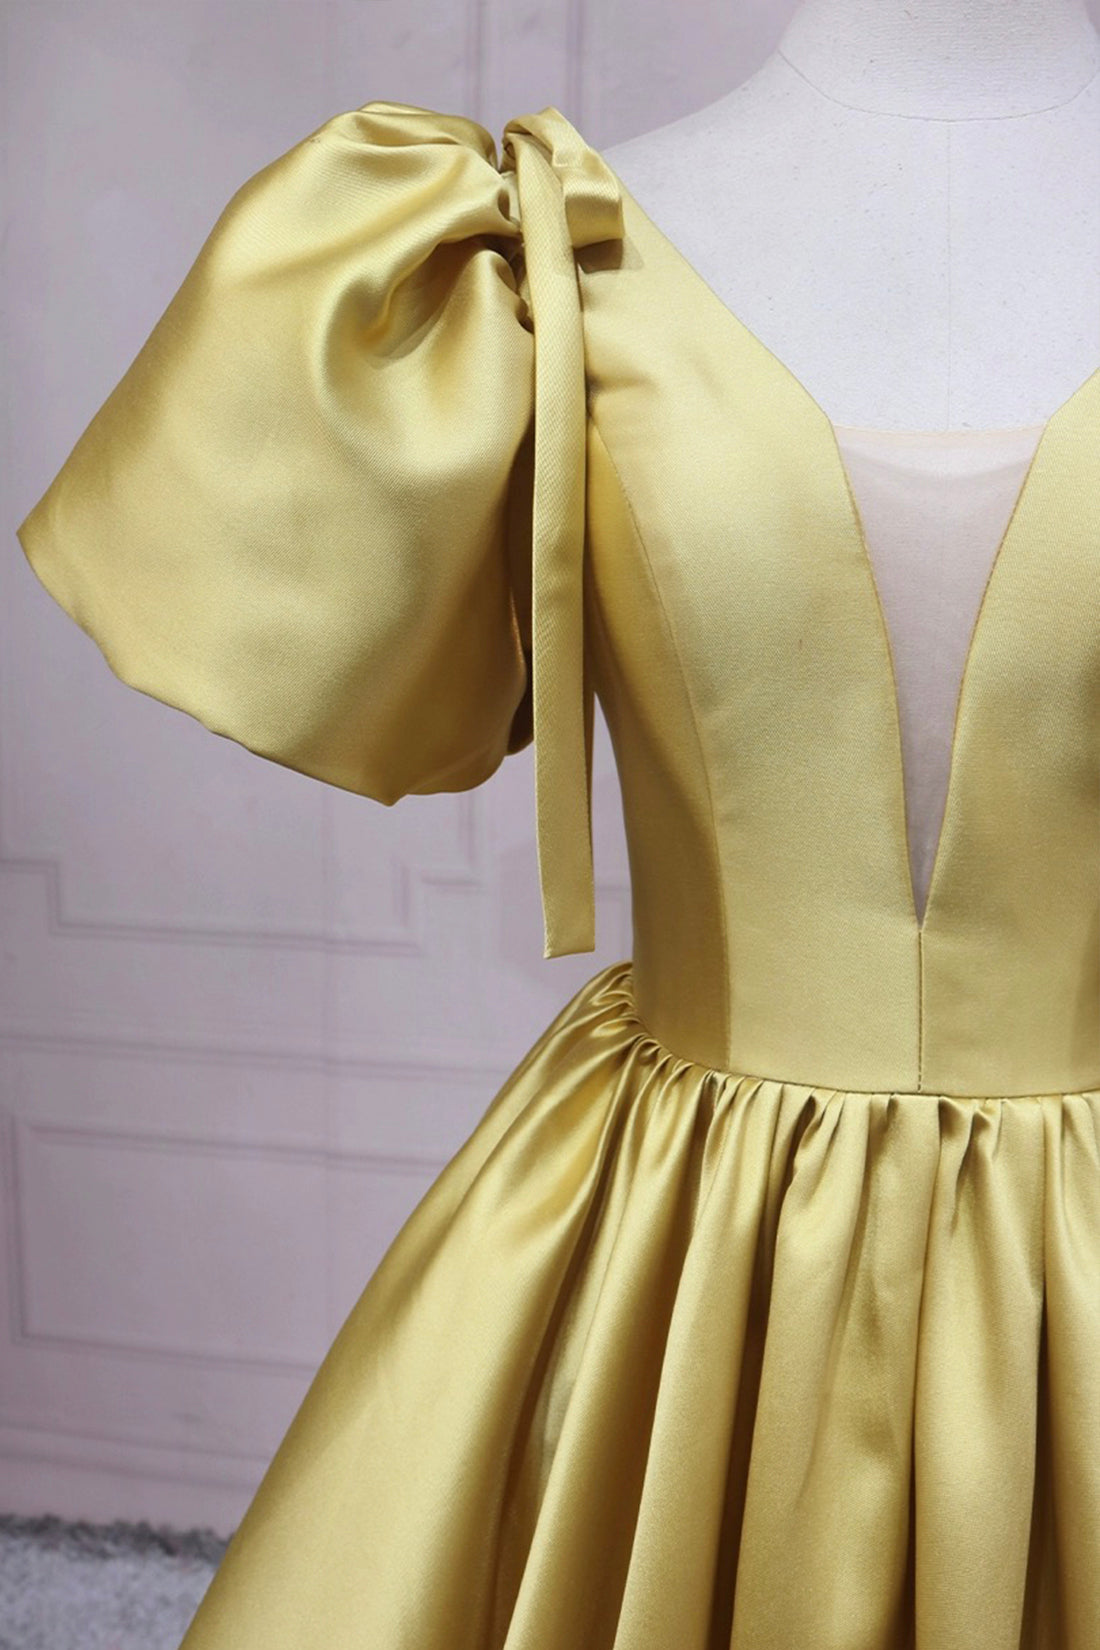 Yellow V-Neck Satin Long Prom Dress, A-Line Puff Sleeves Evening Party Dress